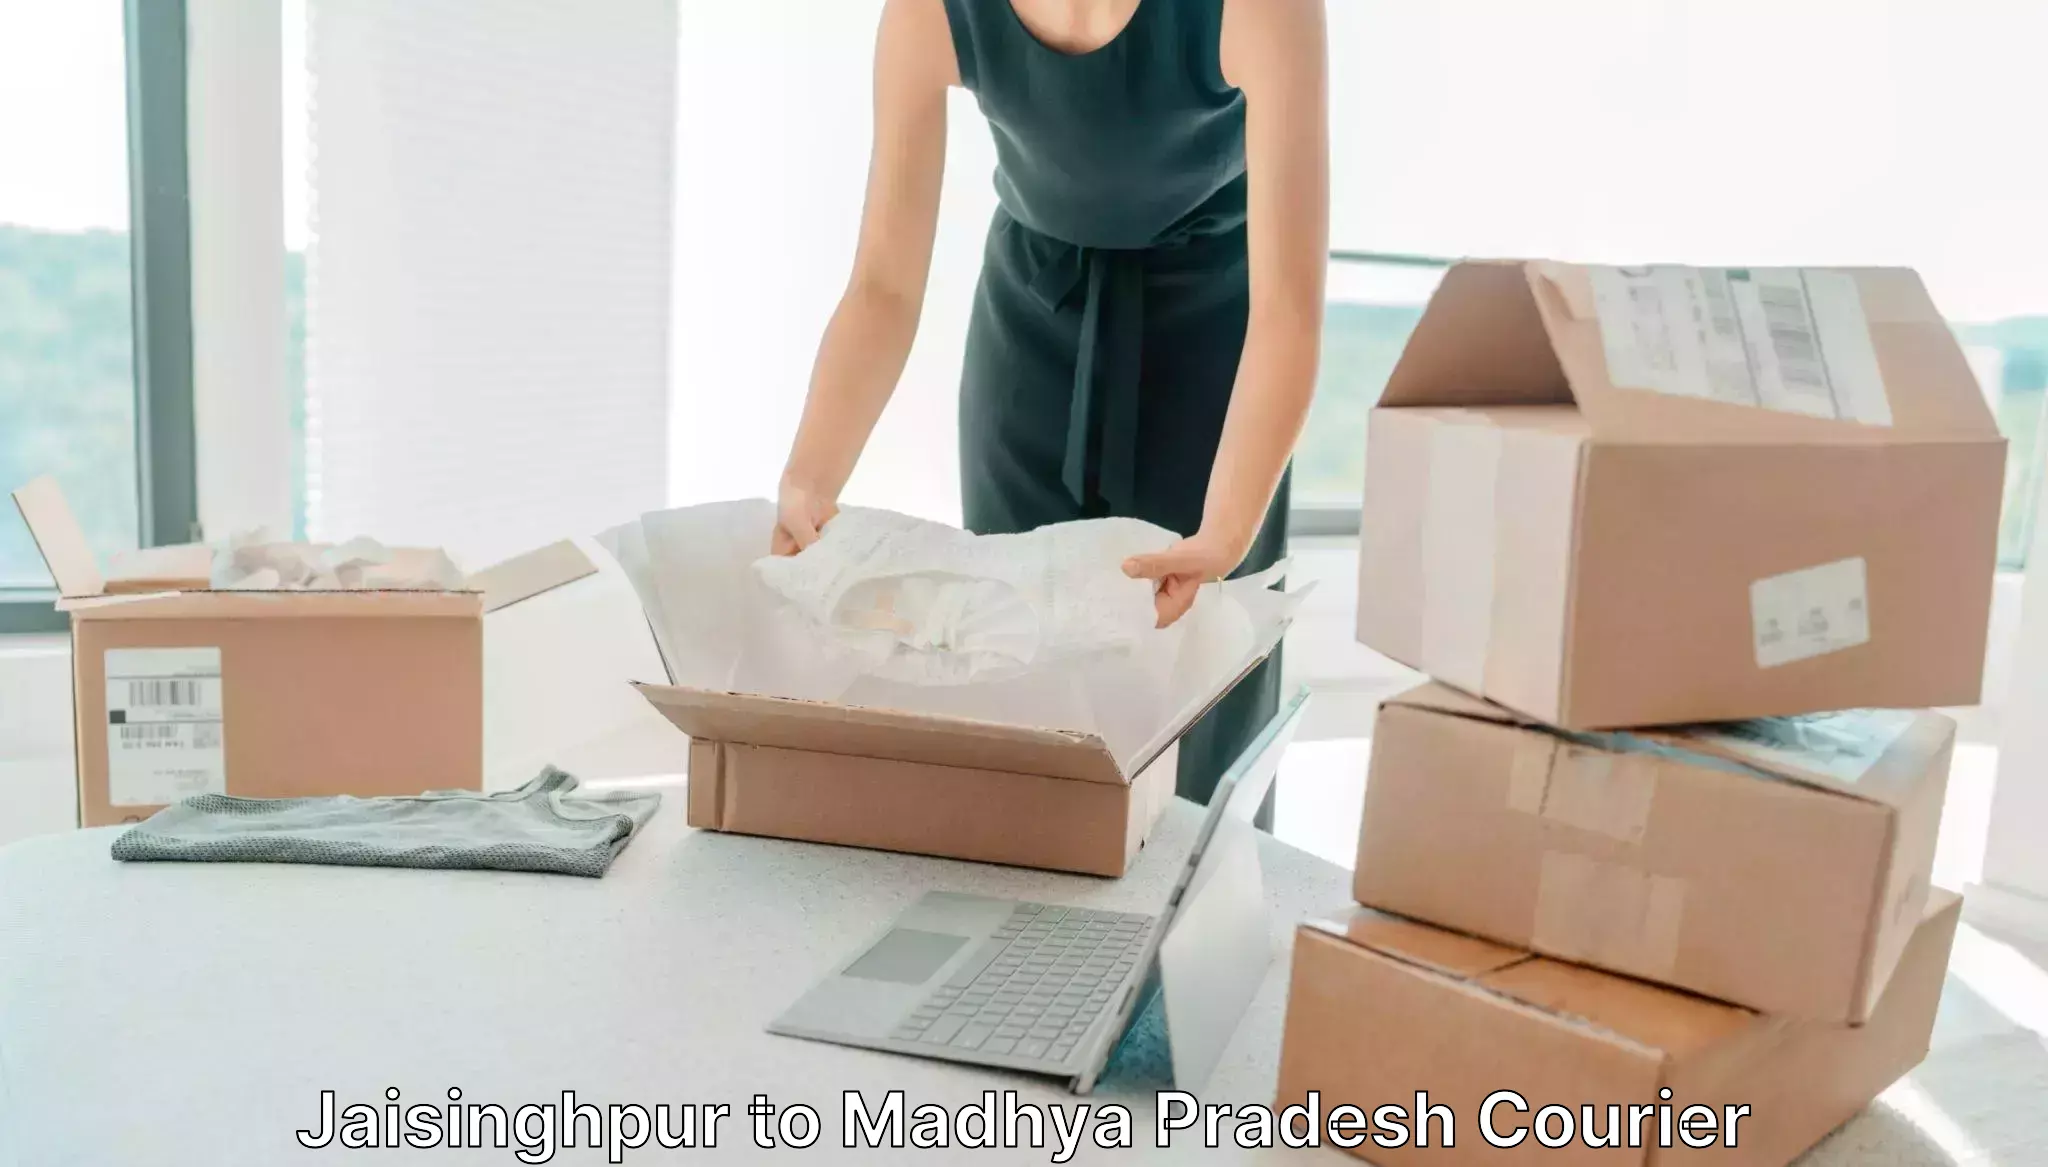 Reliable shipping solutions in Jaisinghpur to Indore